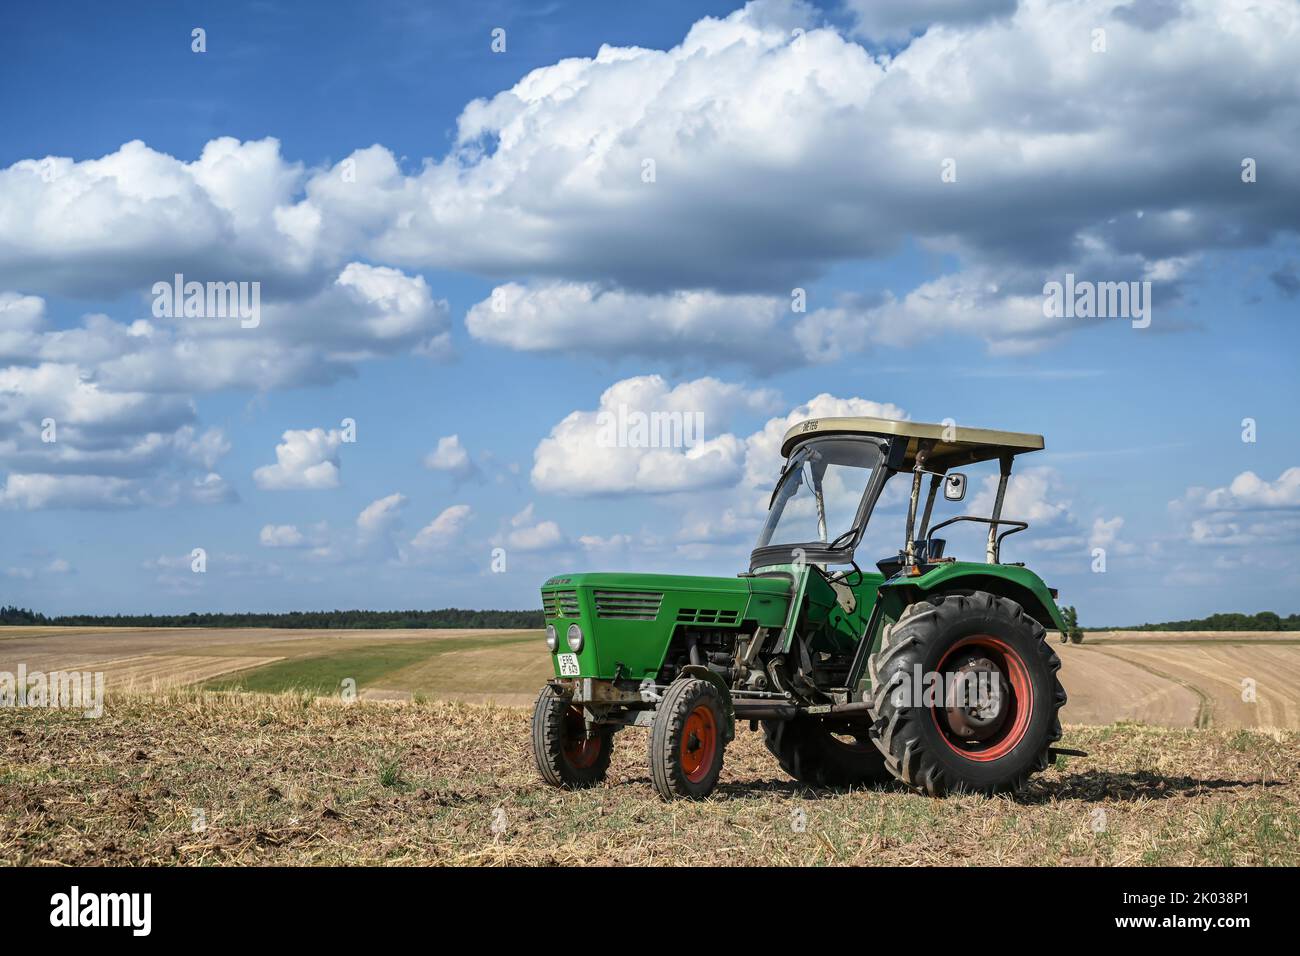 Deutz fahr tractor hi-res stock photography and images - Alamy